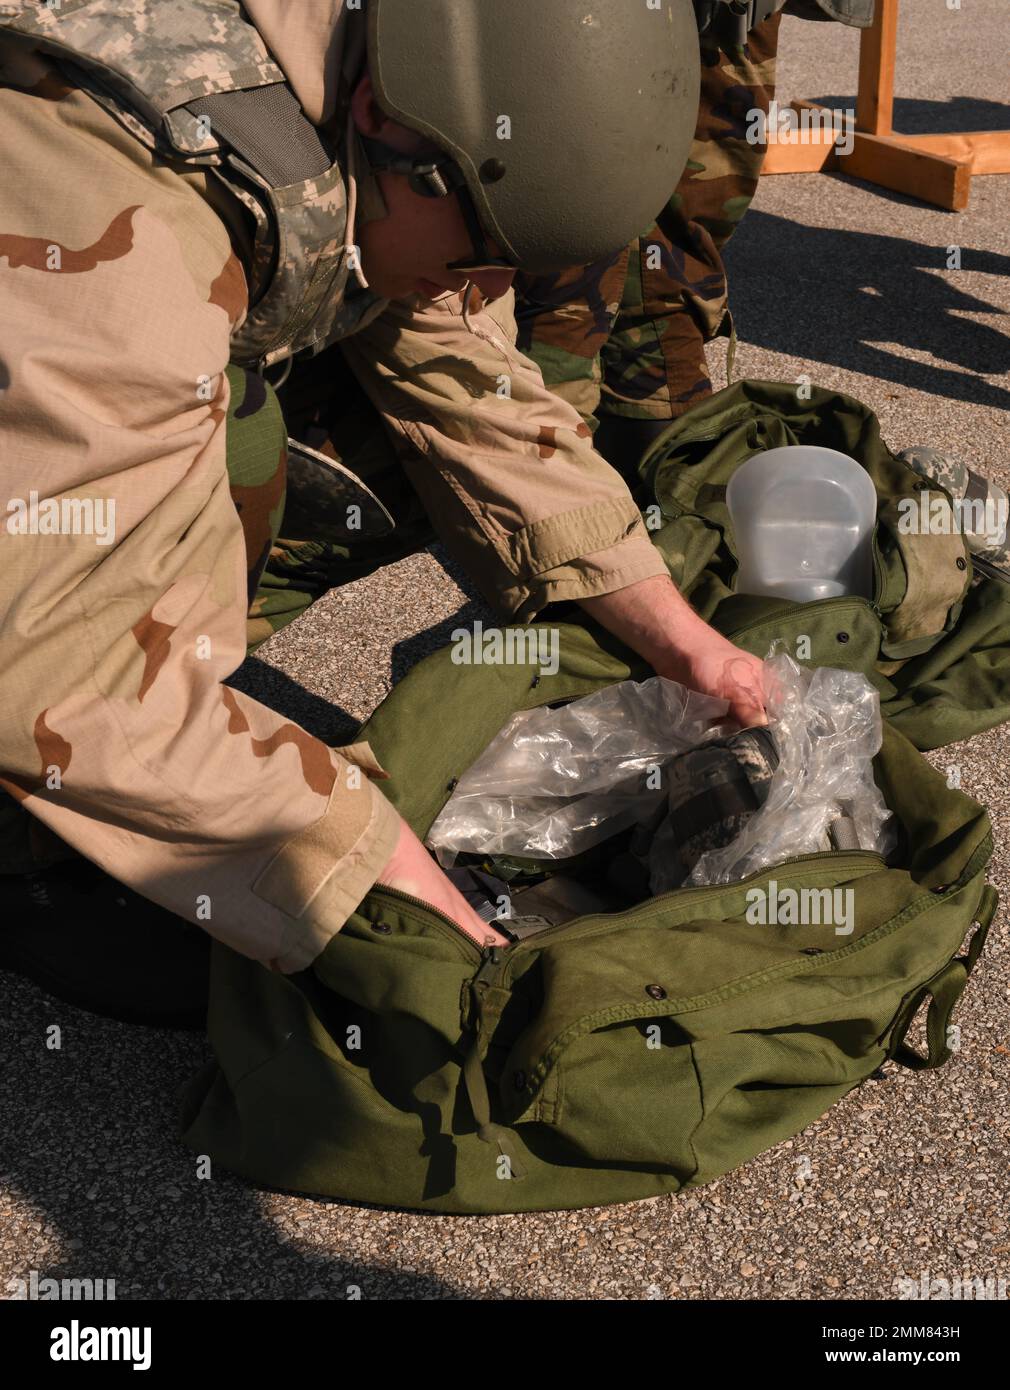 U.S. Air Force Airmen don MOPP gear during a CBRN exercise at Whiteman Air Force Base, Missouri, September, 15, 2022. MOPP gear is protective equipment worn in CBRN-contaminated environments meant to protect an individual from CBRN agents. Utilizing MOPP gear ensures Airmen are ready to respond and defend its personnel and assets. Stock Photo